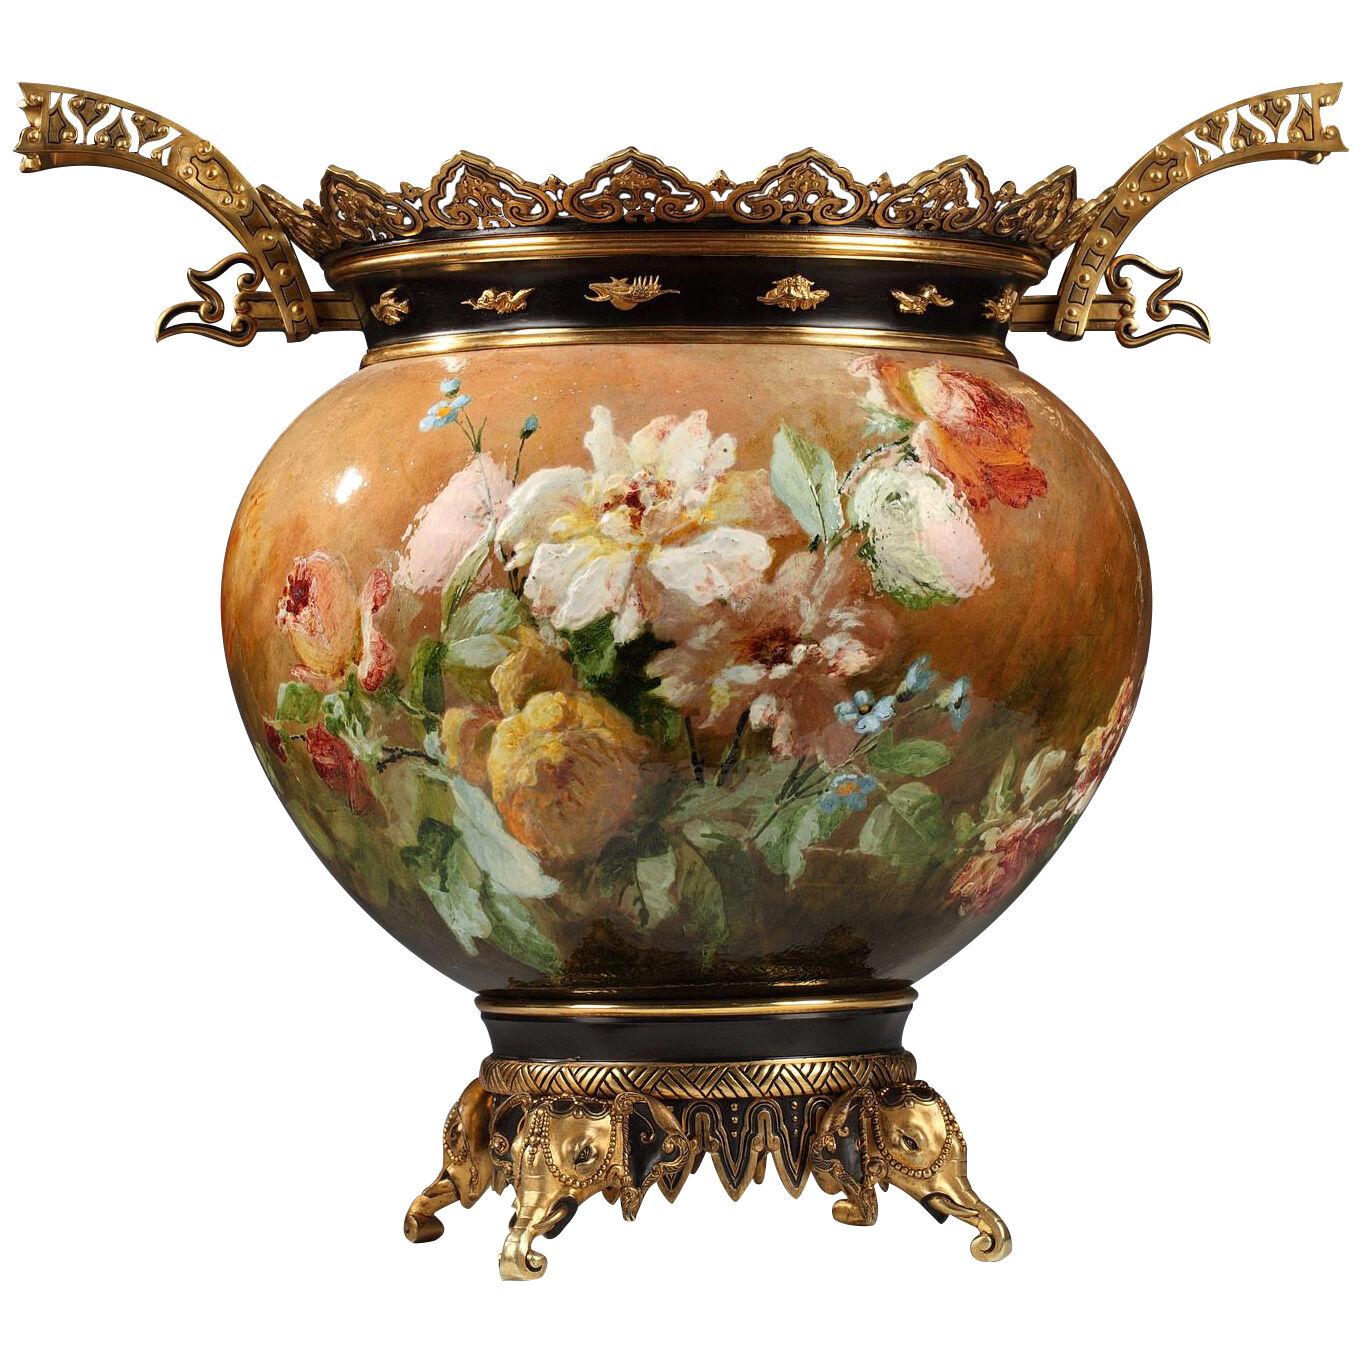 Important Earthenware Planter Attributed to F. Barbedienne, France, Circa 1880